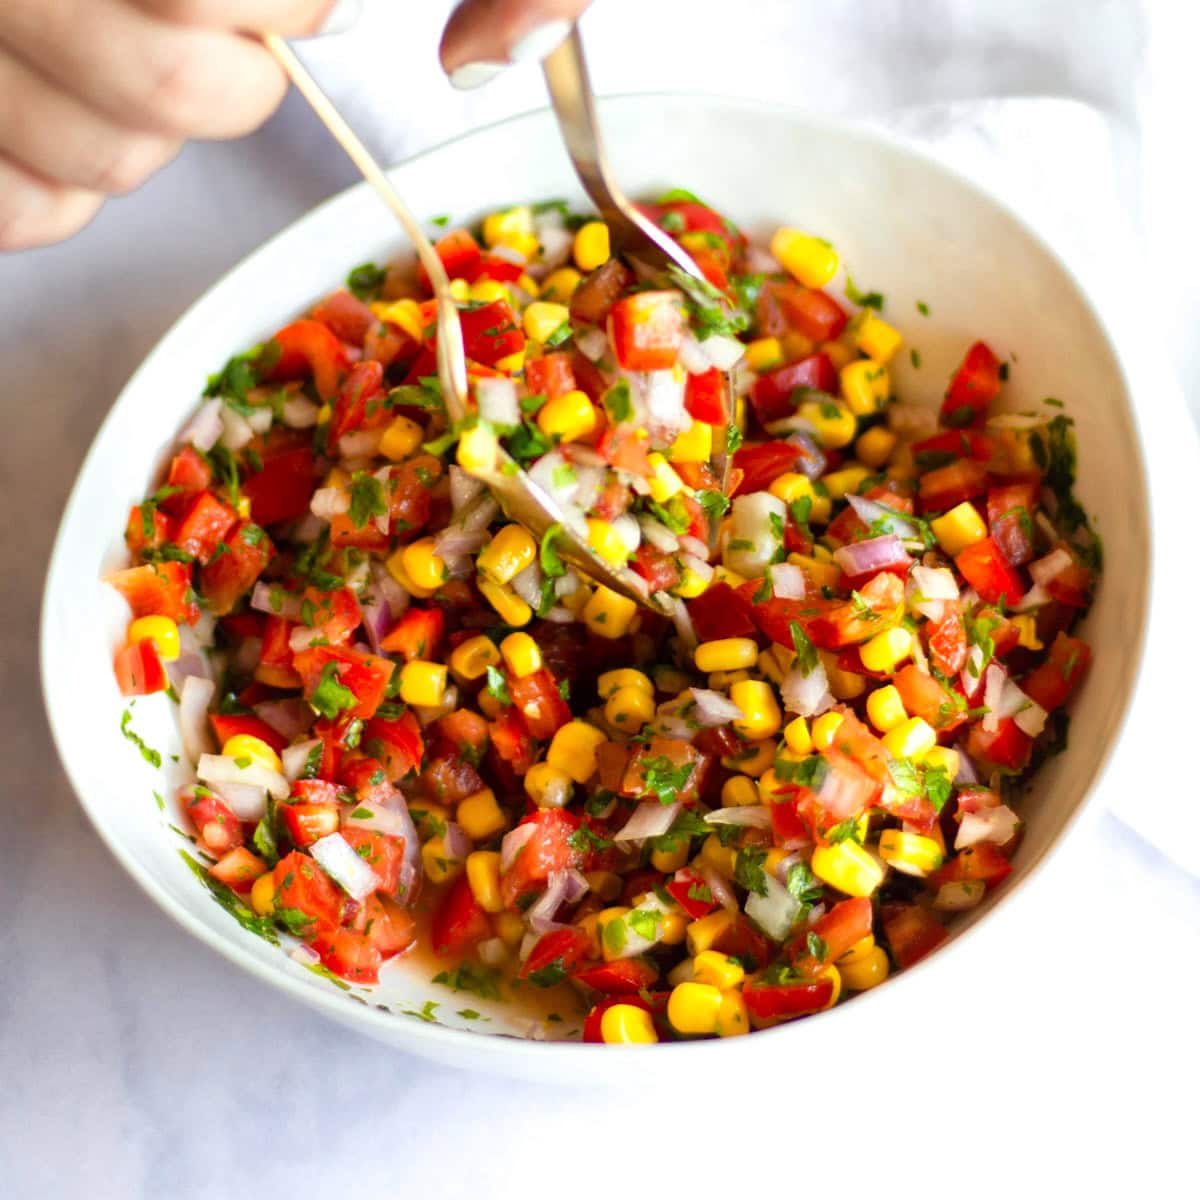 Two spoons tossing corn pico de gallo to mix it up.